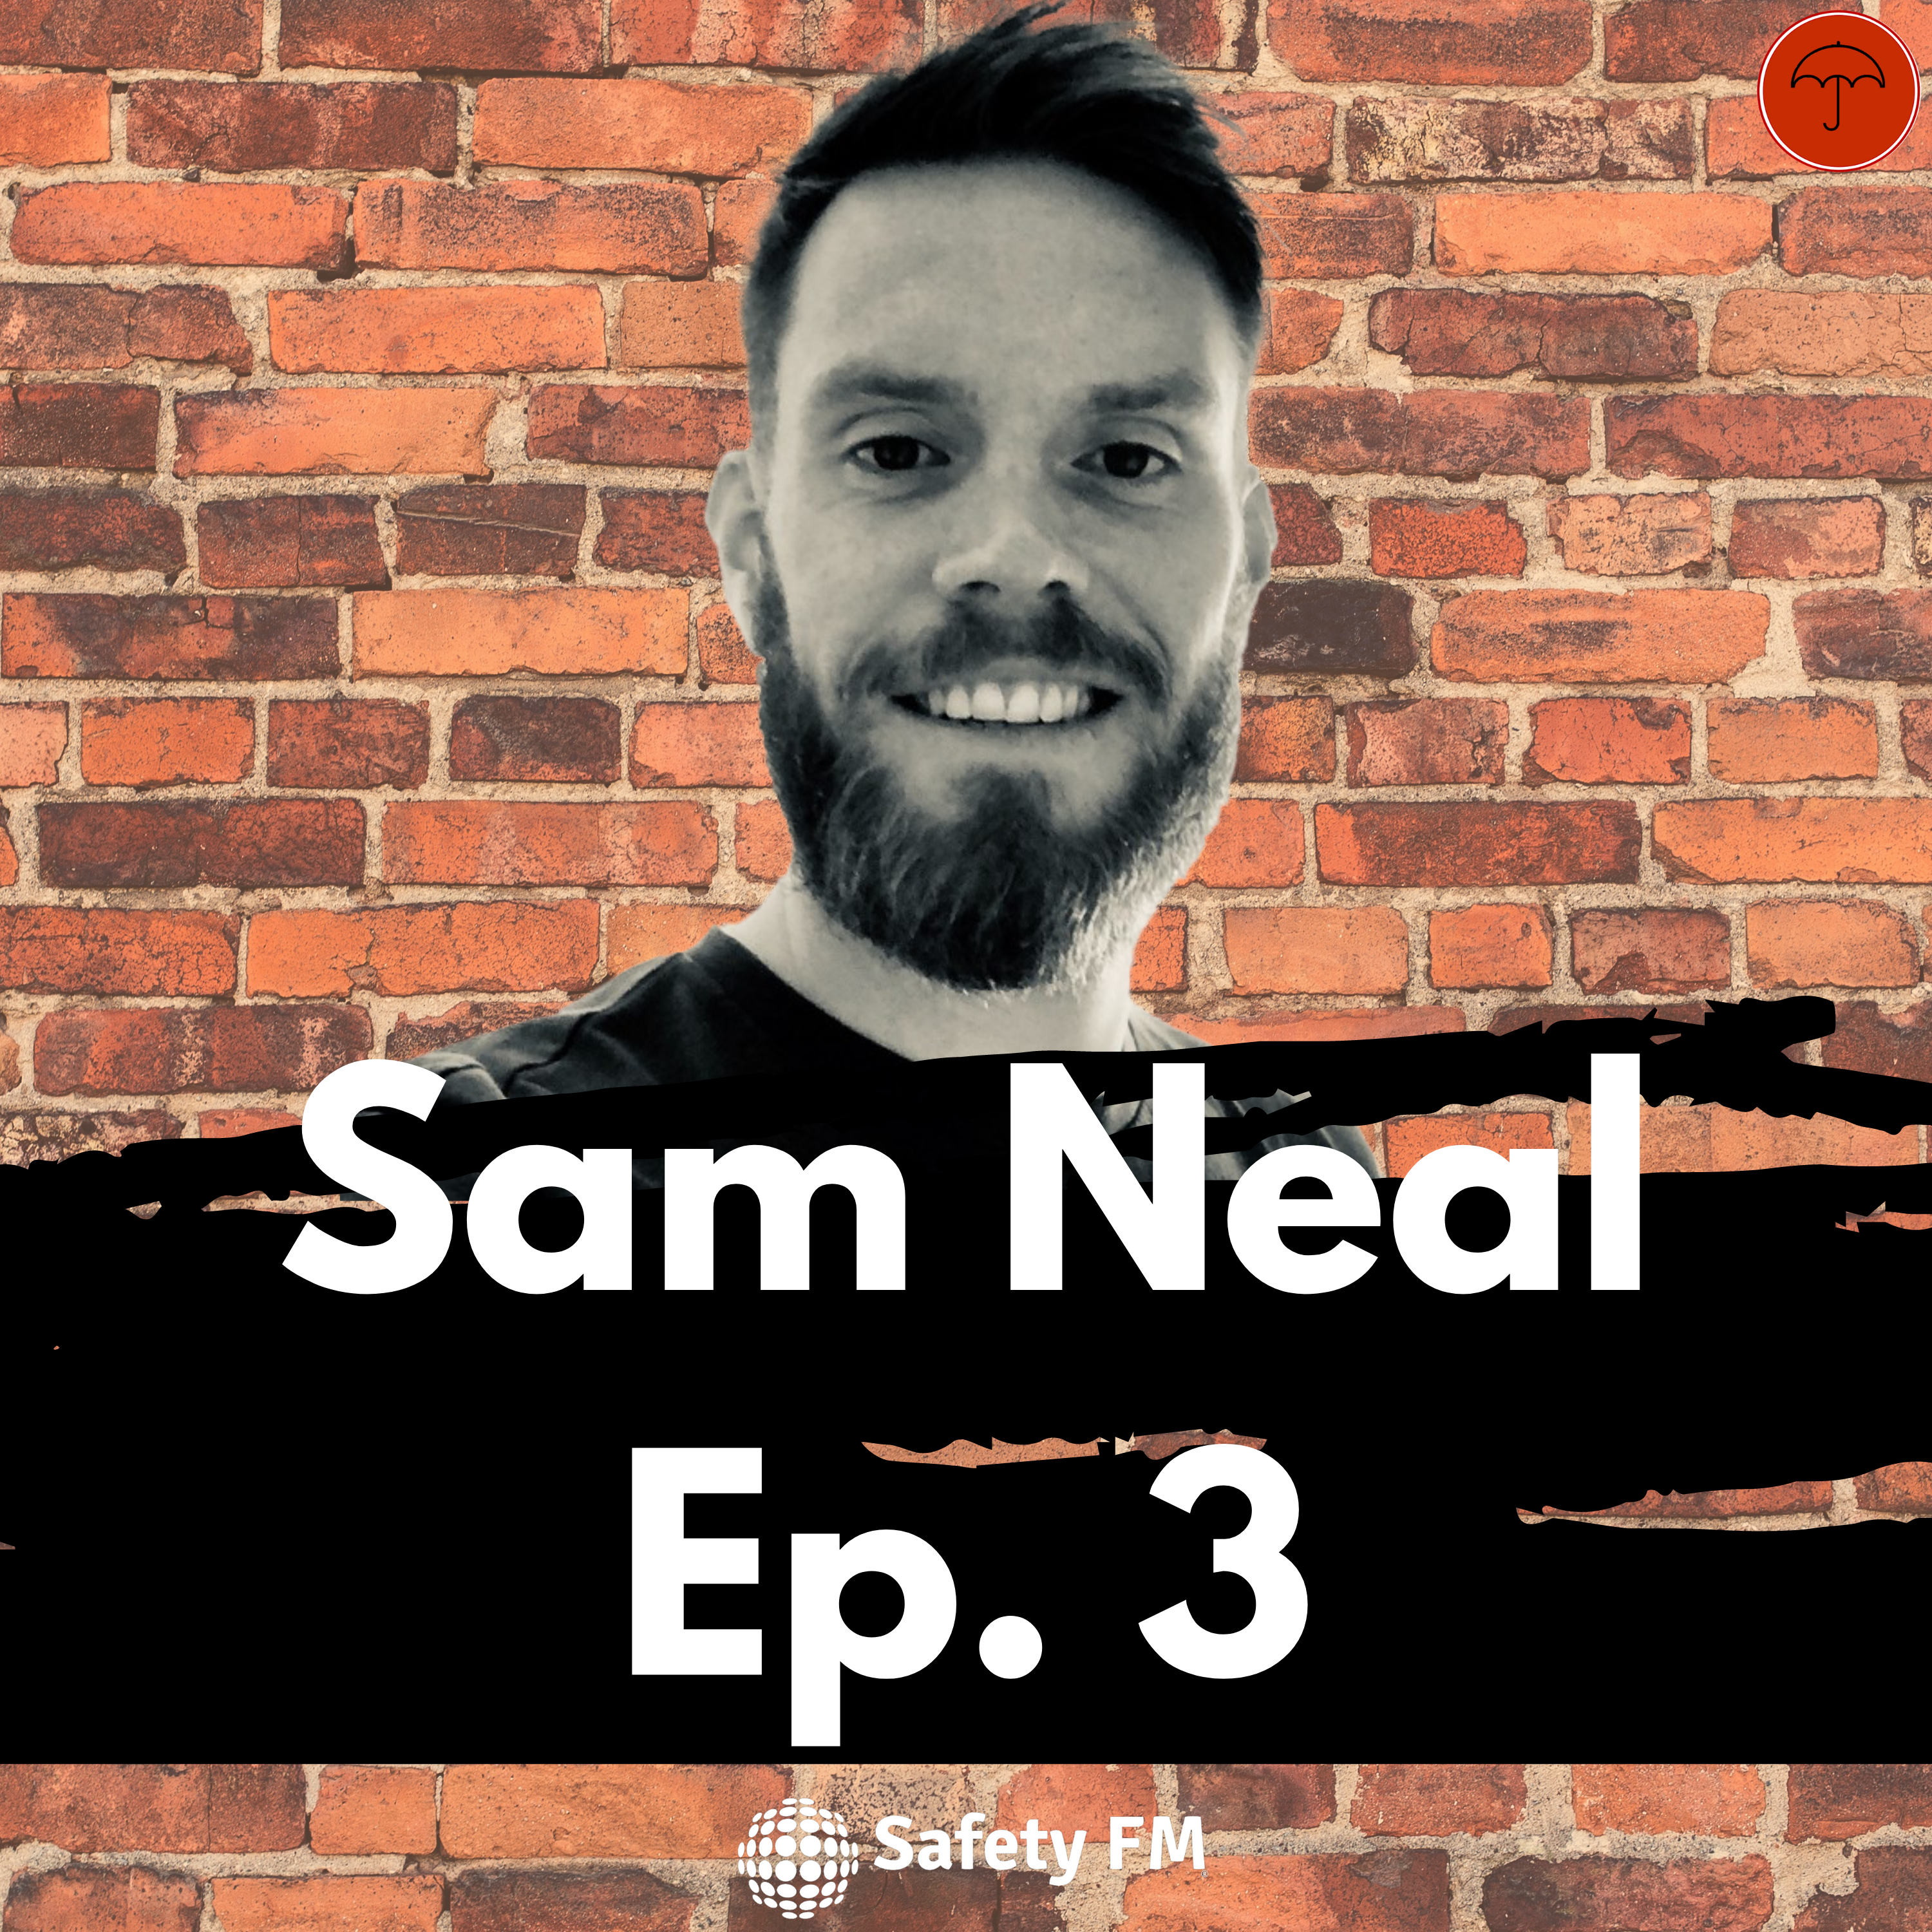 Rebranding Safety with Sam Neal - CoHost for Q2! Episode 3